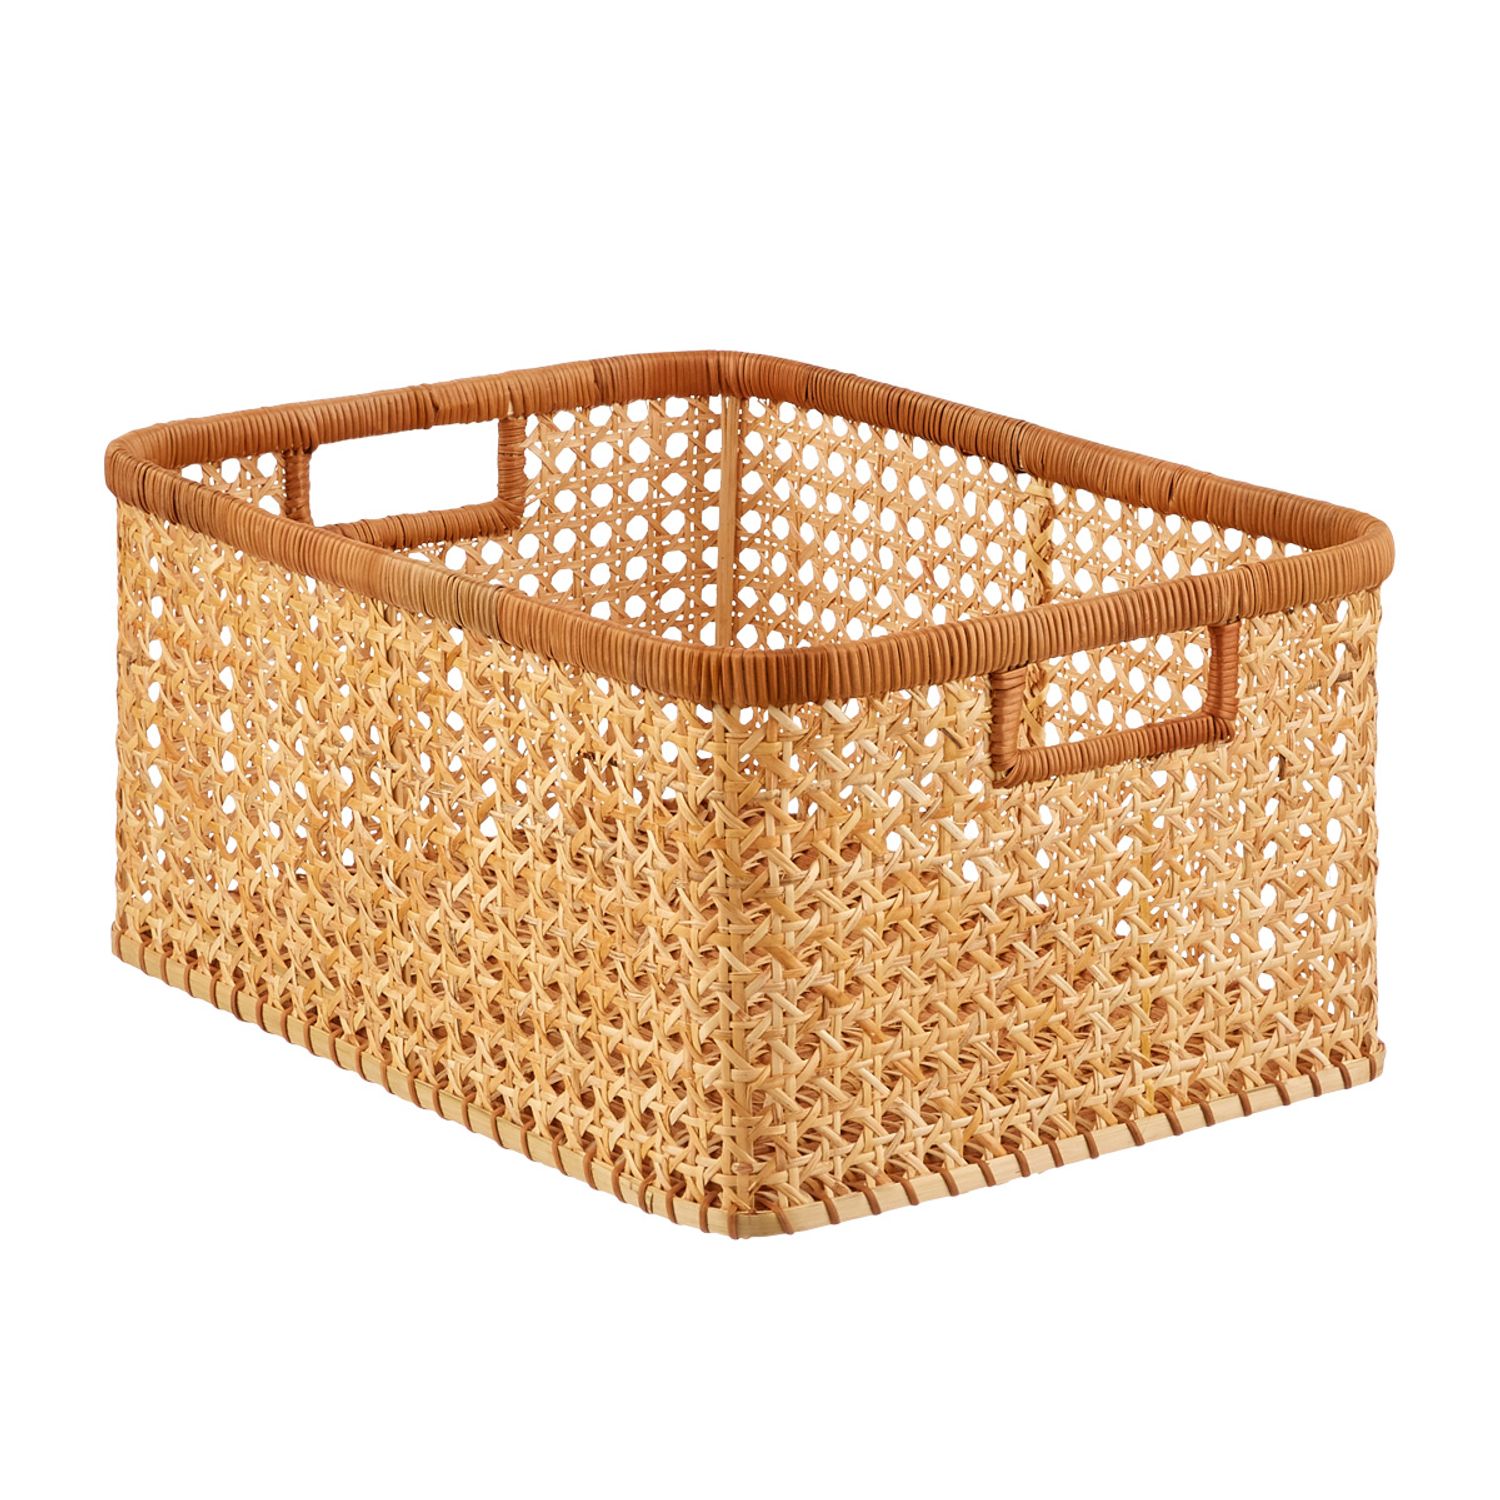 Shop Albany Cane Rattan Bin - 3 in Size Medium from The Container Store on Openhaus